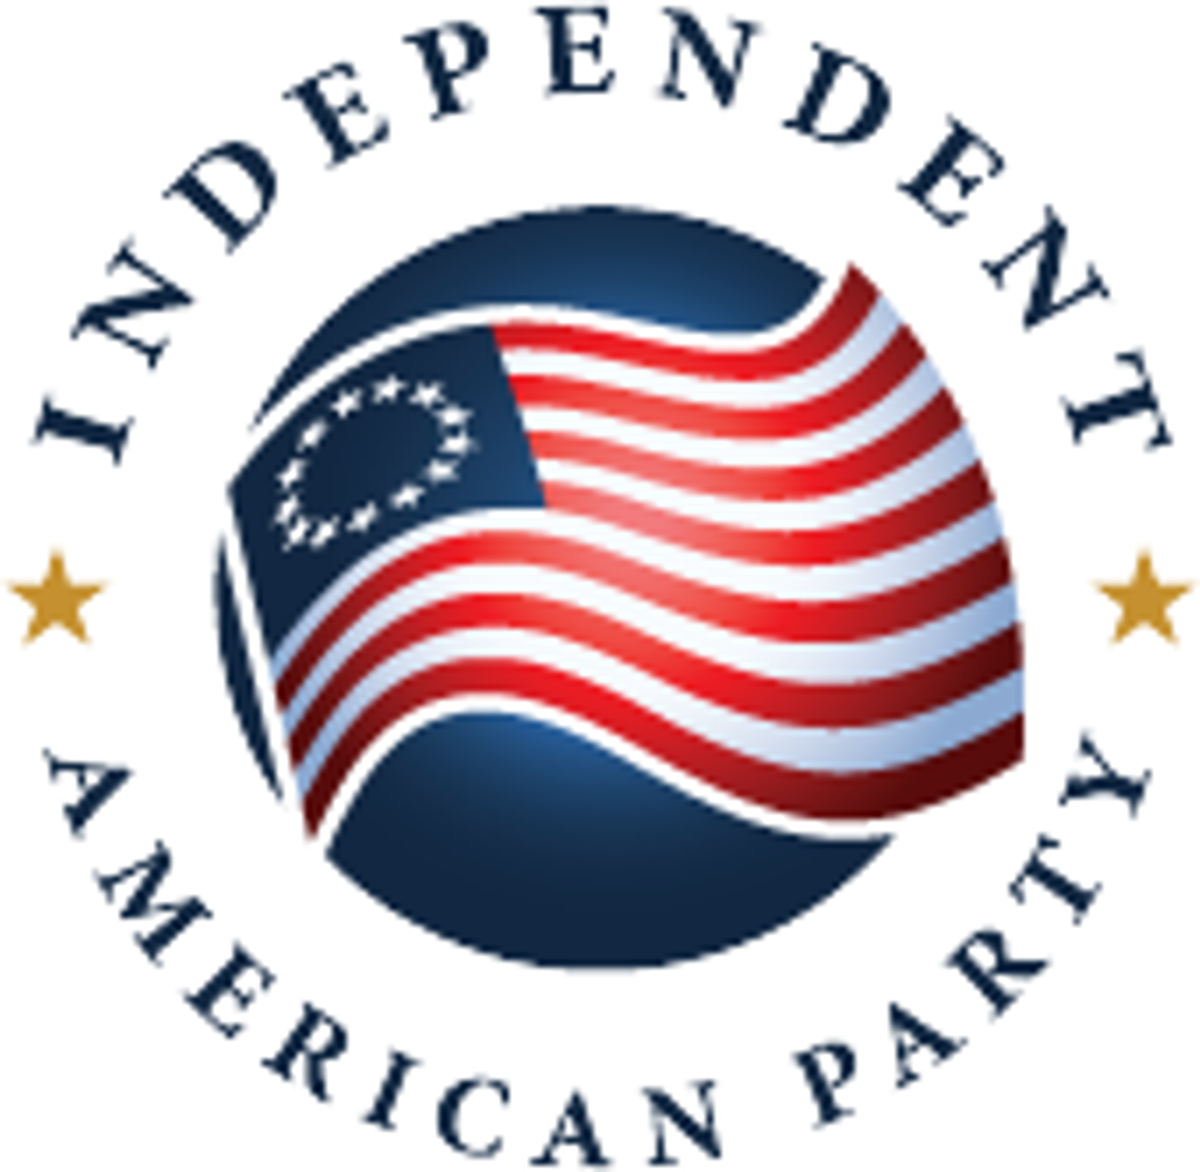 What Is The American Independent Party?